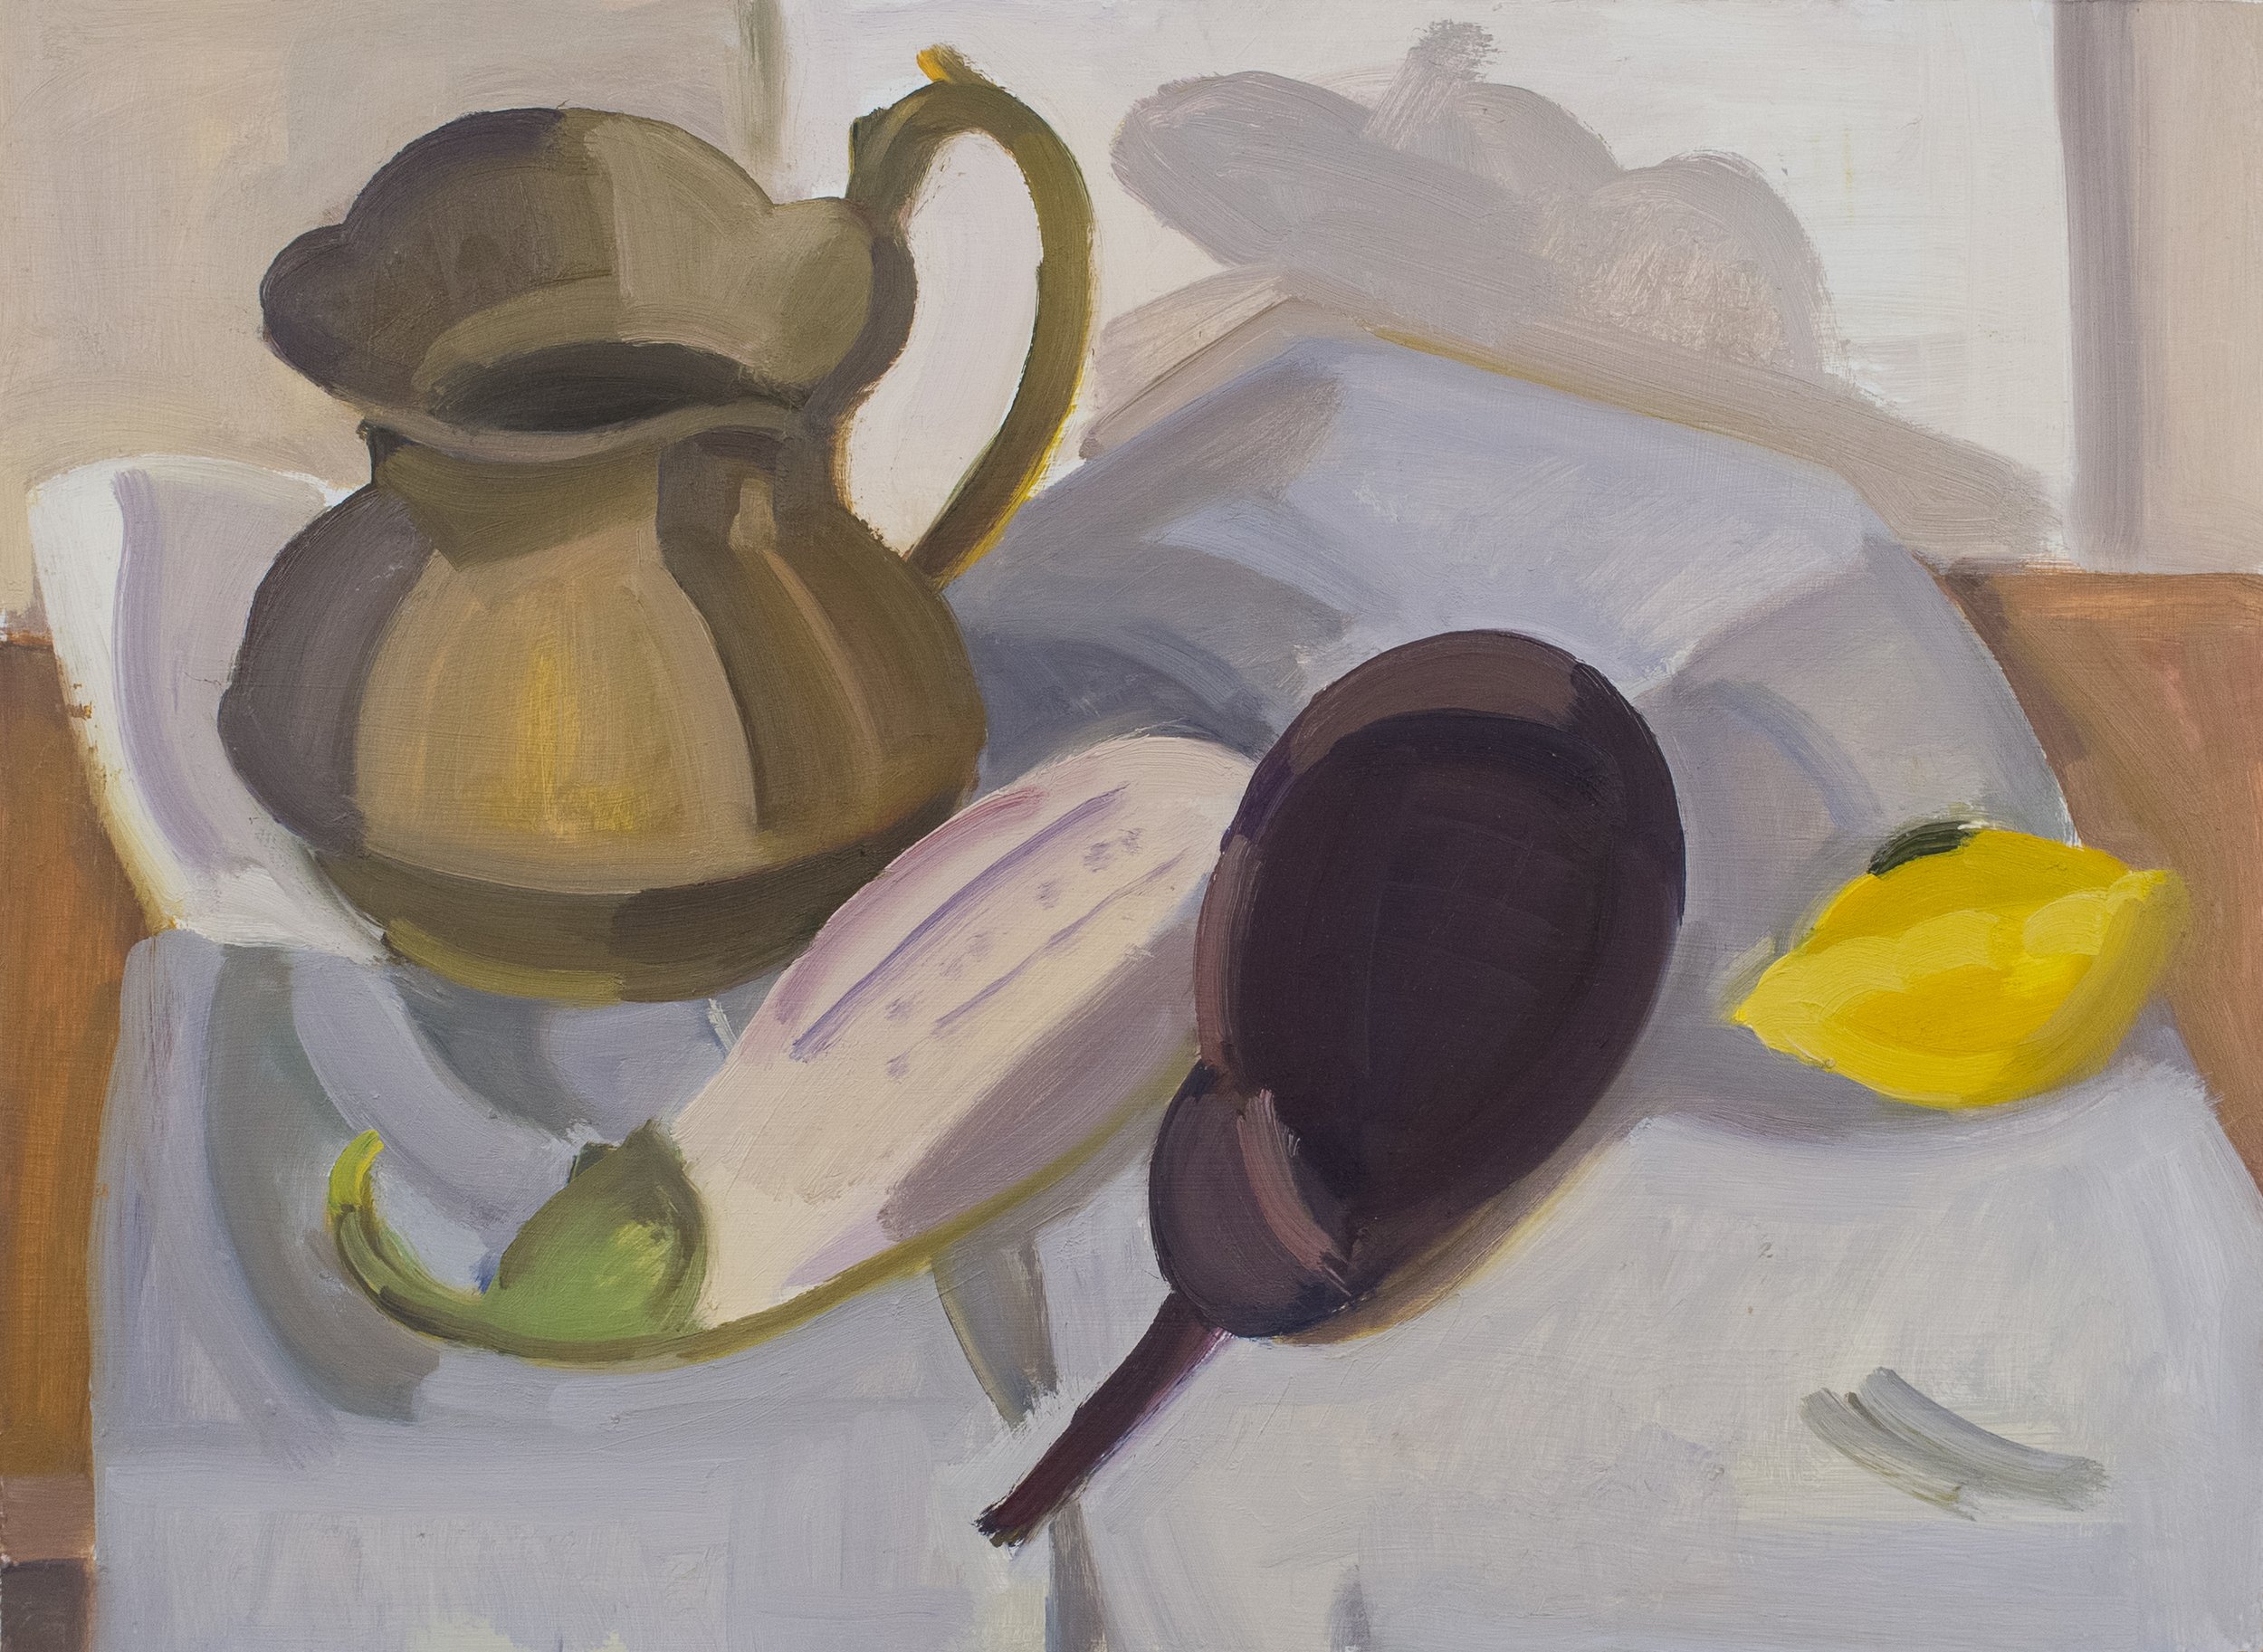   Brass Pitcher, Eggplants and Shadow , c. 2006, oil/panel (signed and framed by the artist), 11 x 15 in., $1,200 